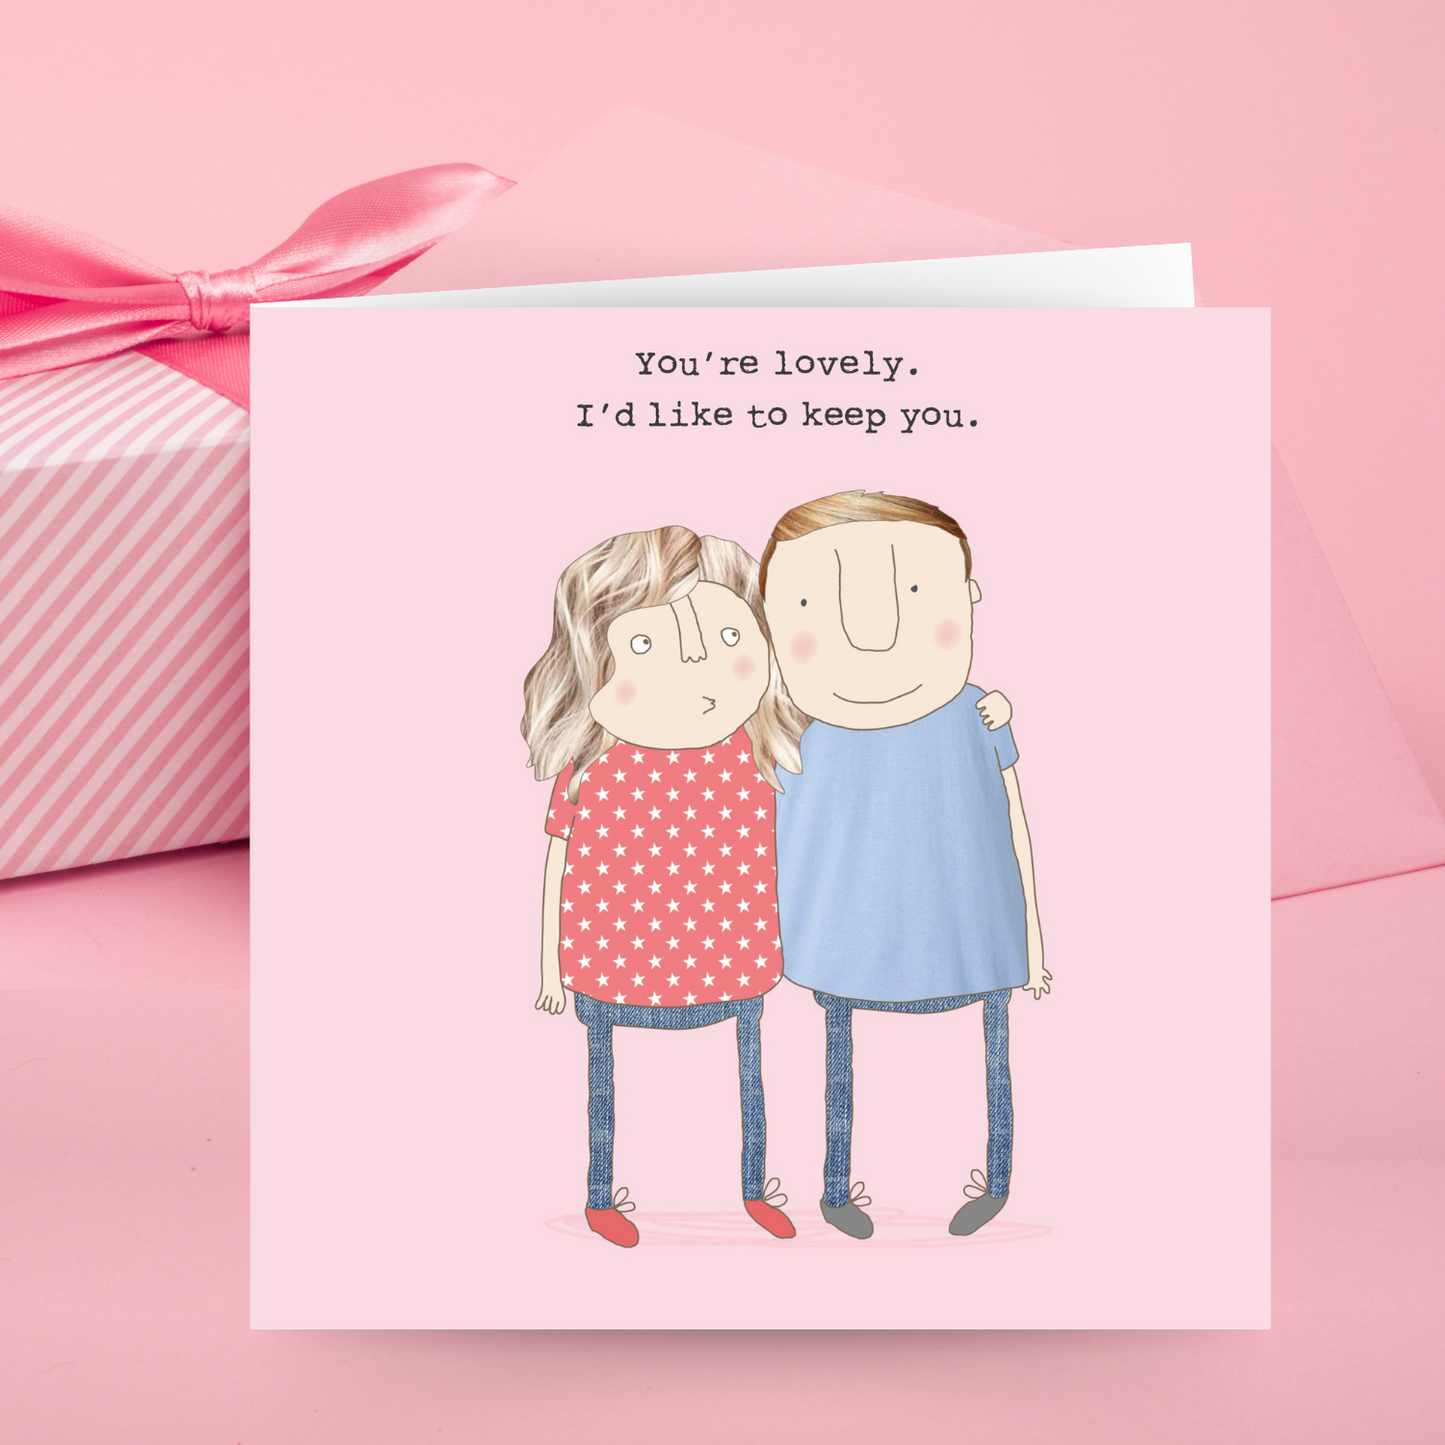 Rosie Made A Thing You're Lovely In Love! Valentine's Day Funny Greeting Card